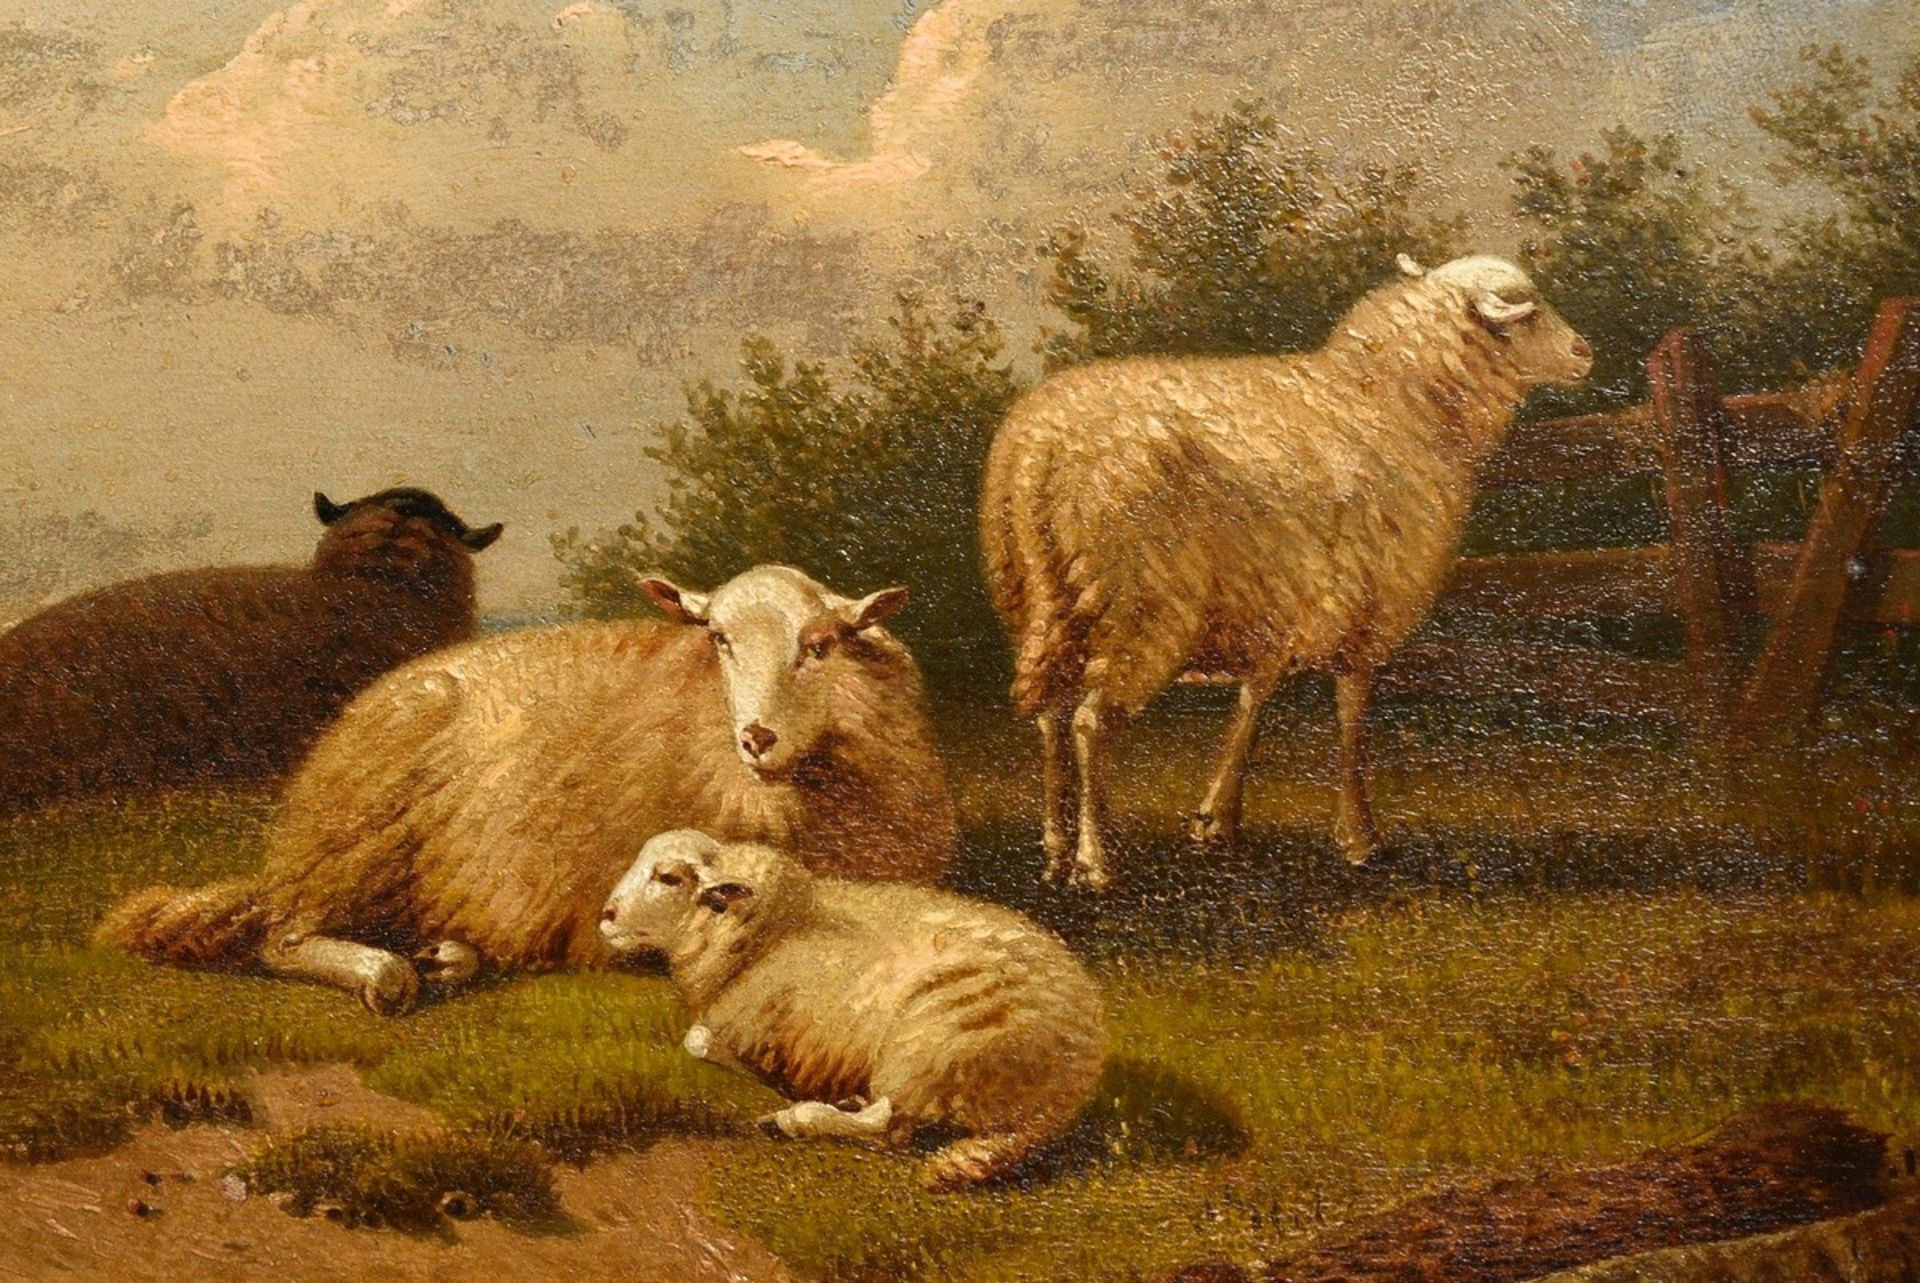 Dieghem, Joseph van (1843-1885) "Resting Sheep", oil/wood, magnificent frame (small defects), 23x16 - Image 3 of 5